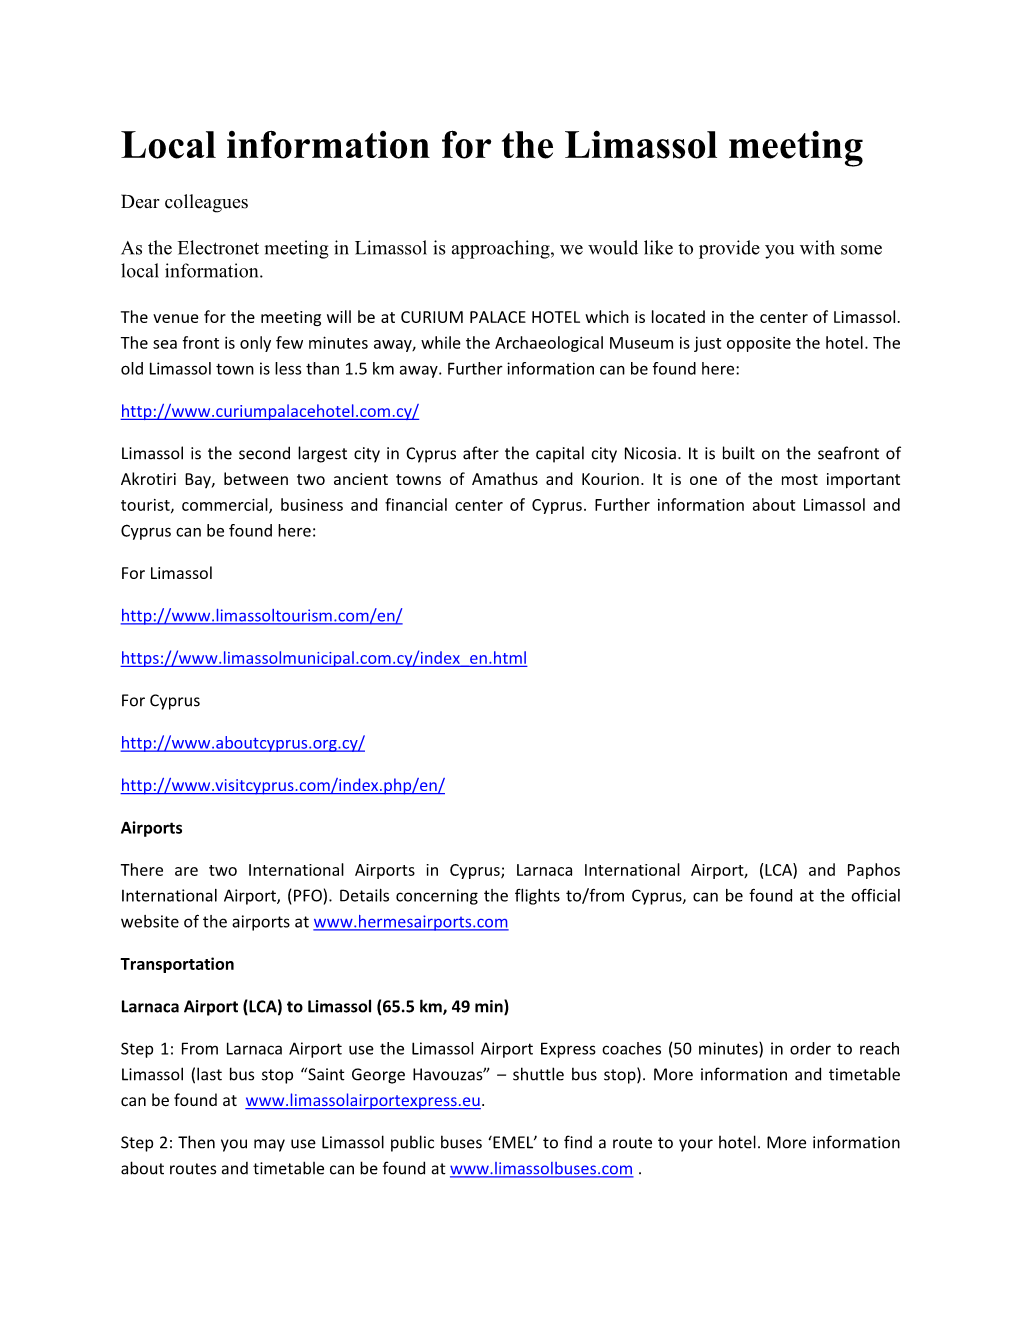 Local Information for the Limassol Meeting